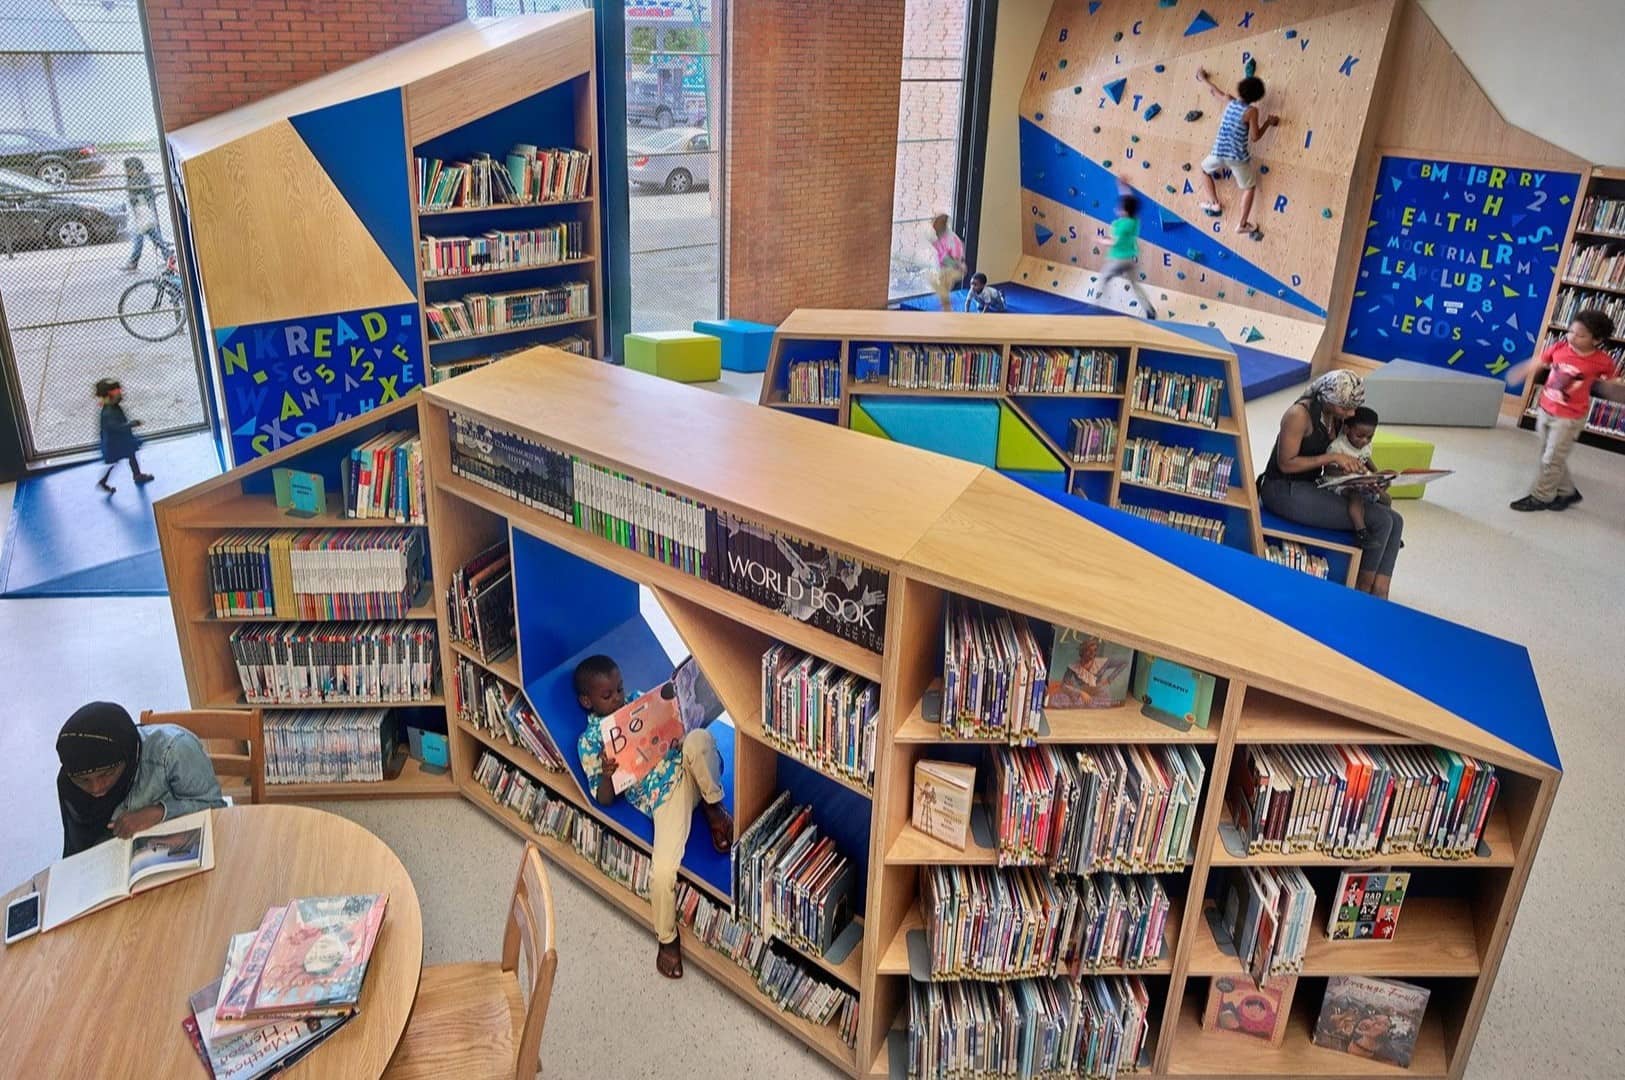 Which Hillsborough Public Library Has A Children’s Play Area